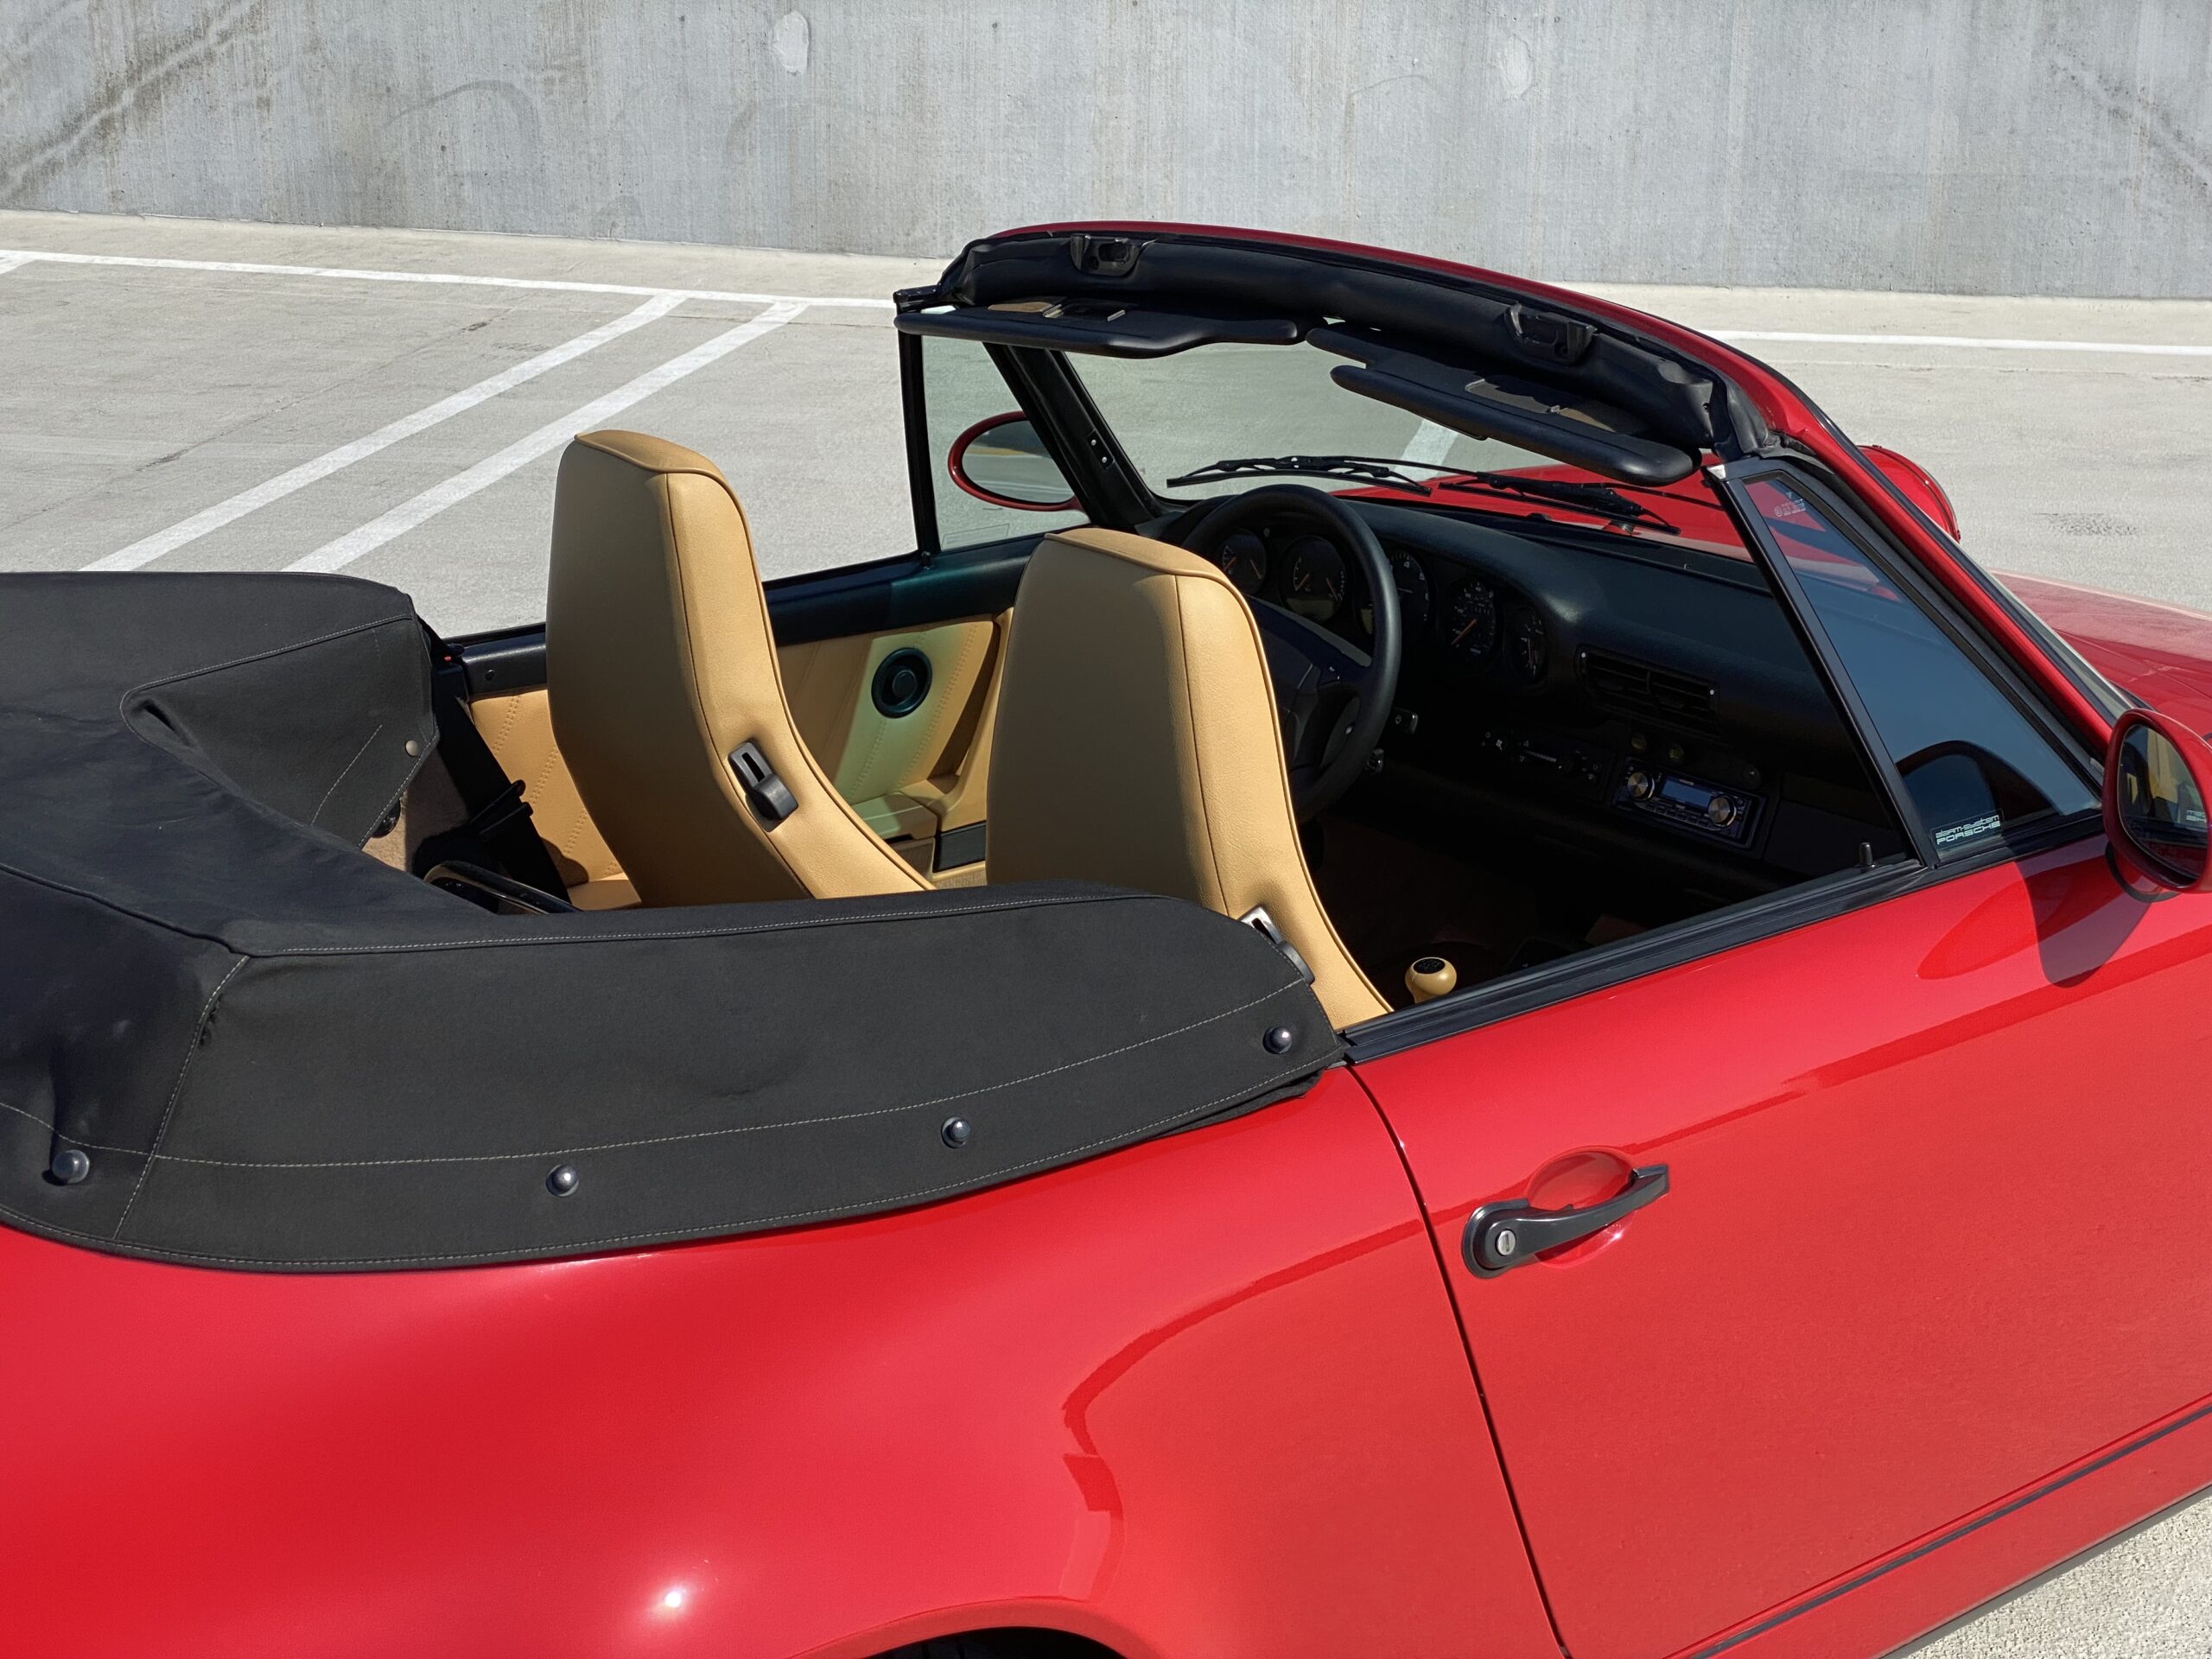 1993 Carrera 2 Cabriolet, Full Service Records, Cup Wheels, Manual Transmission, Rear Seat Delete, Accident and Rust Free